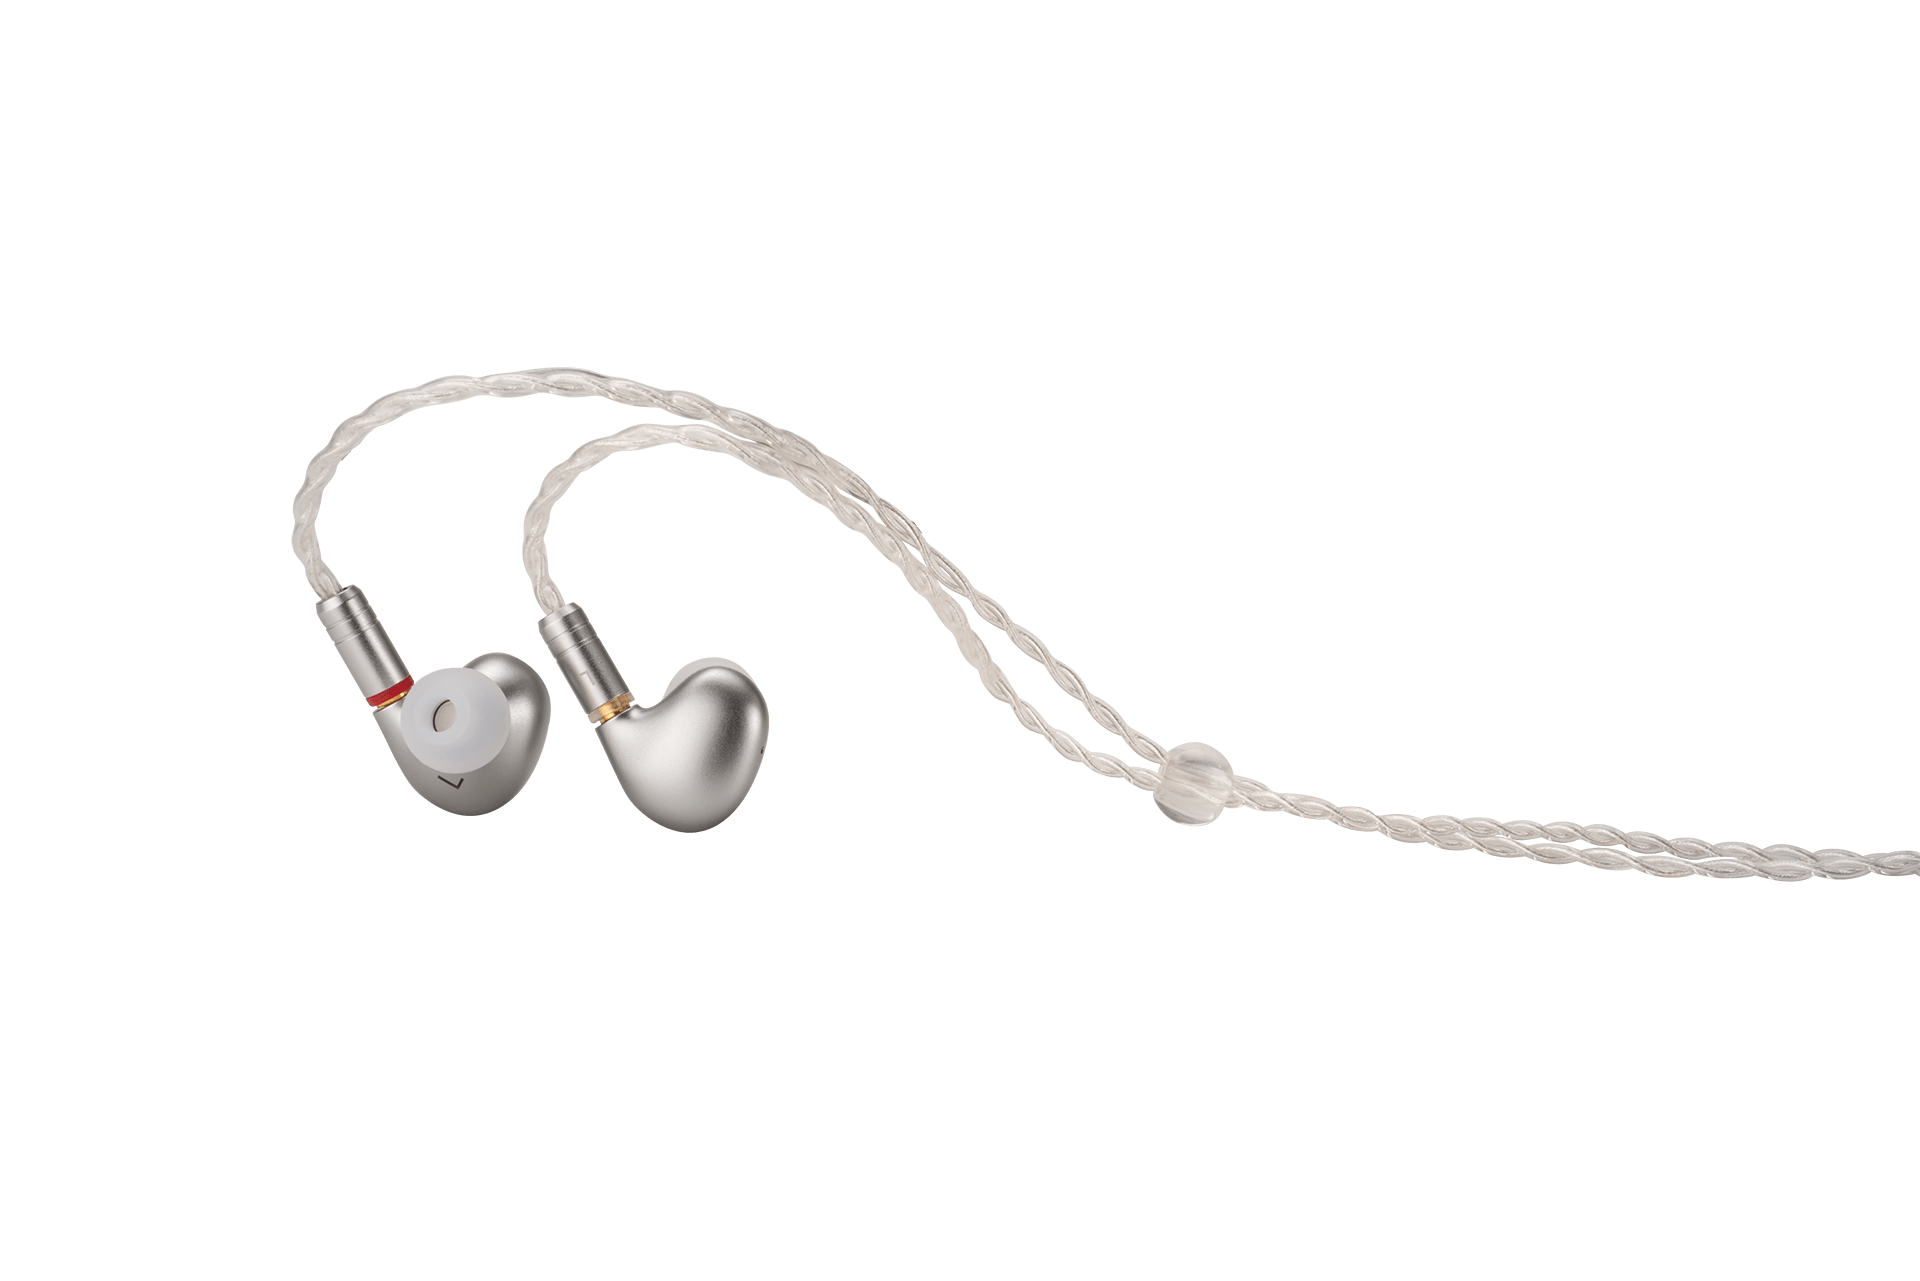 Buy Tin HiFi T2 Plus Earphone at HiFiNage in India with warranty.